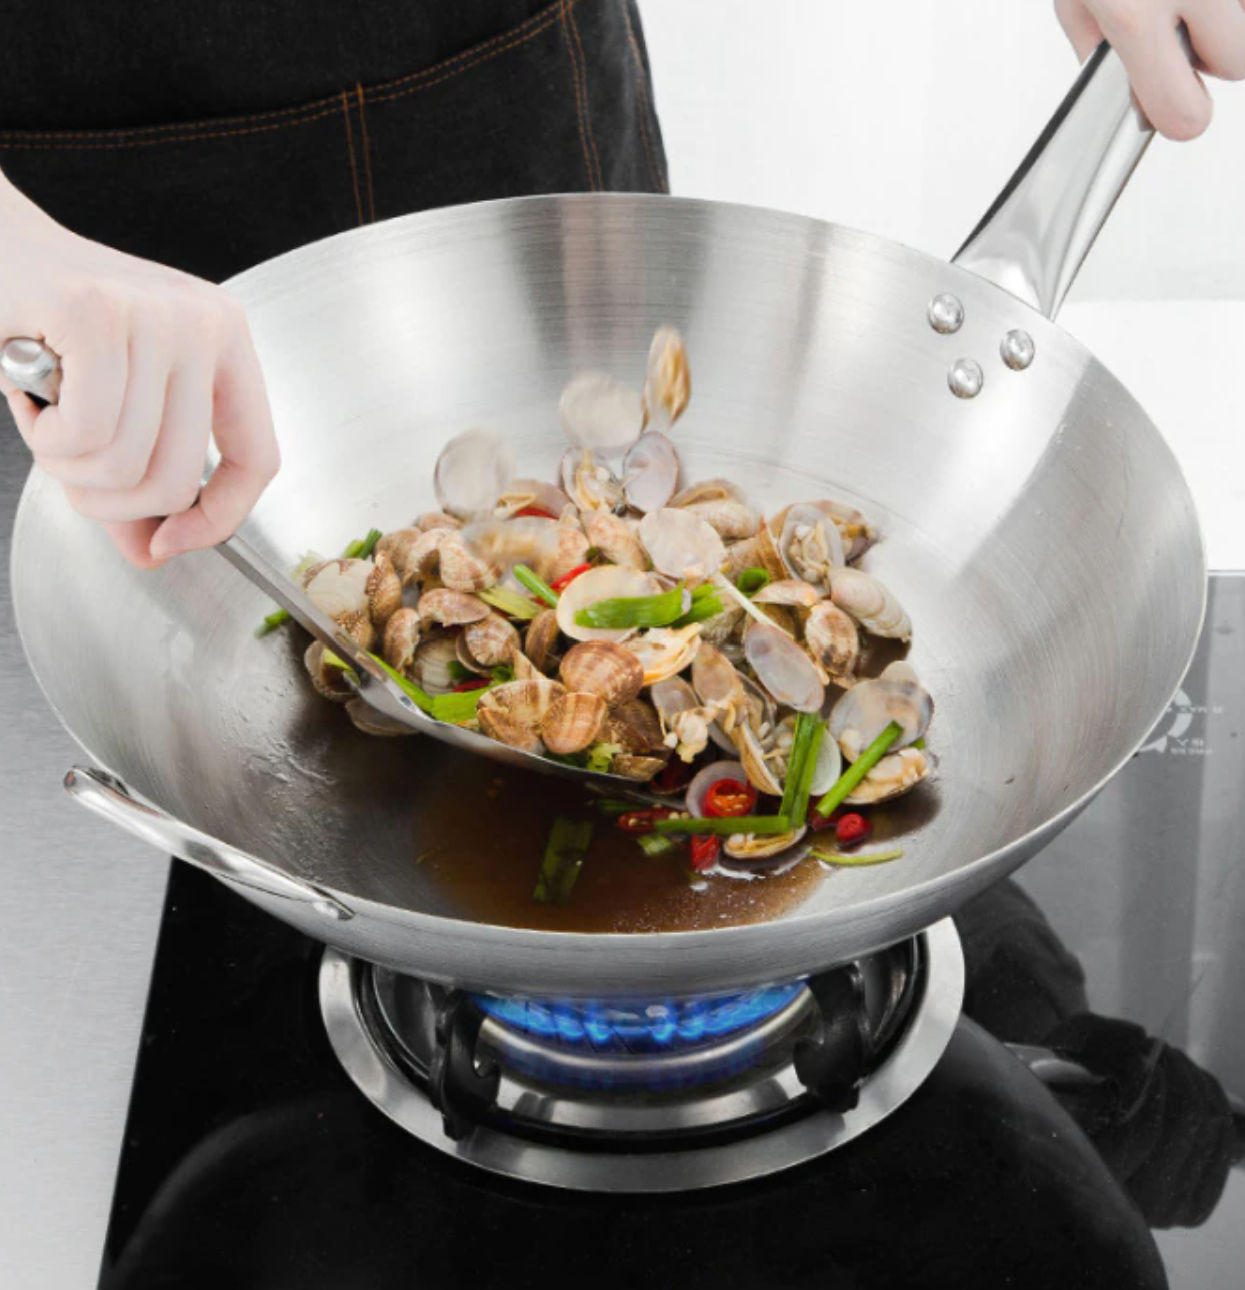 Stainless Steel Fry Pan with Short Handles